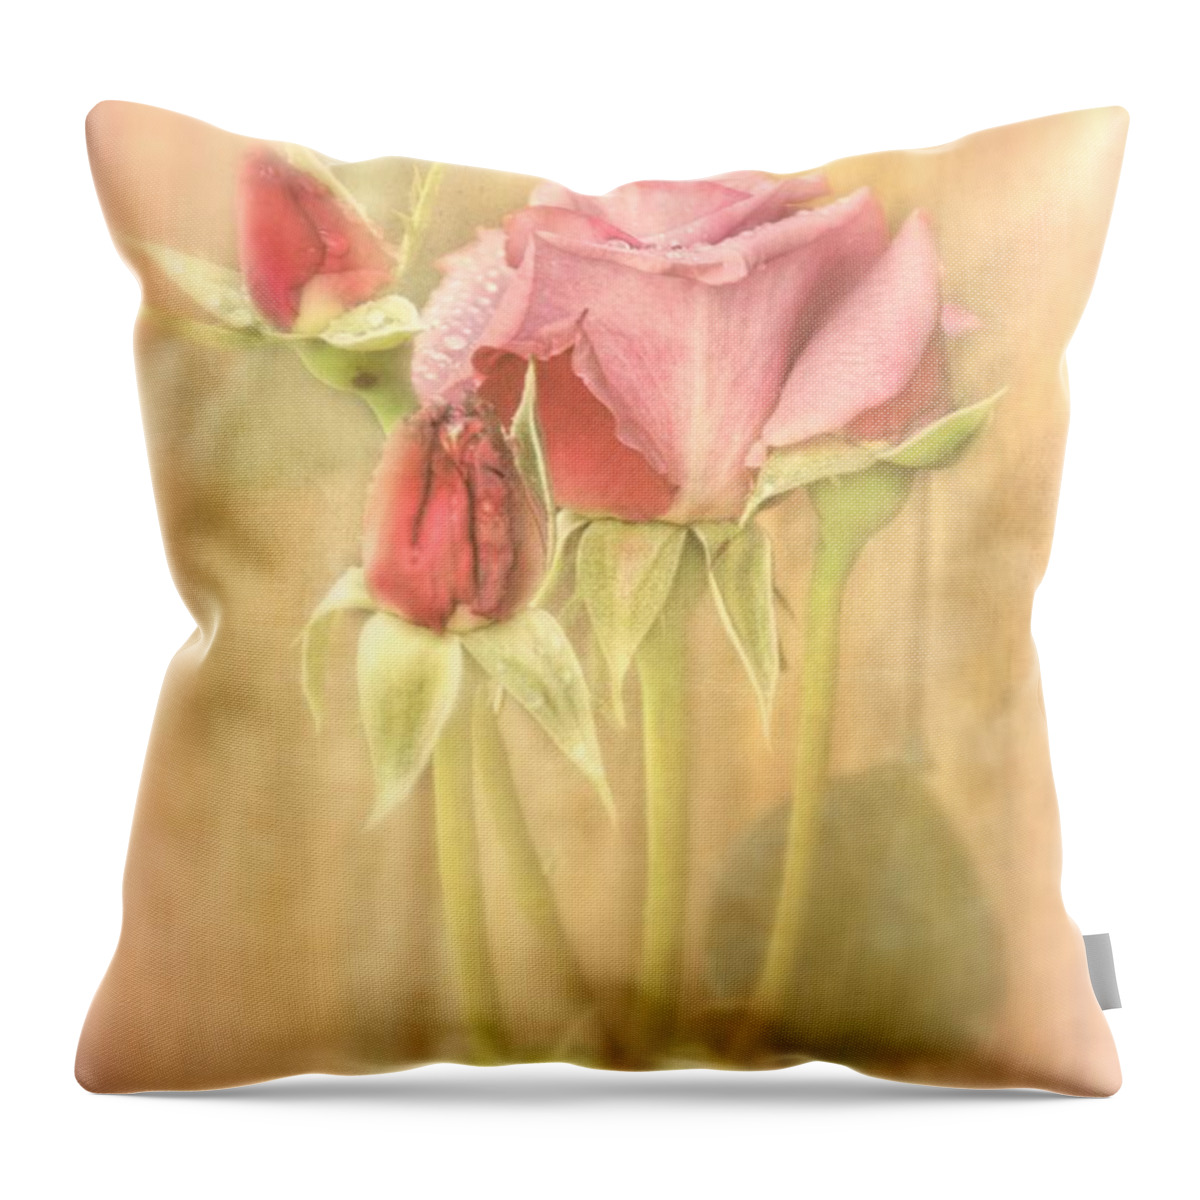 Pink Throw Pillow featuring the photograph Pretty In Pink by Peggy Hughes